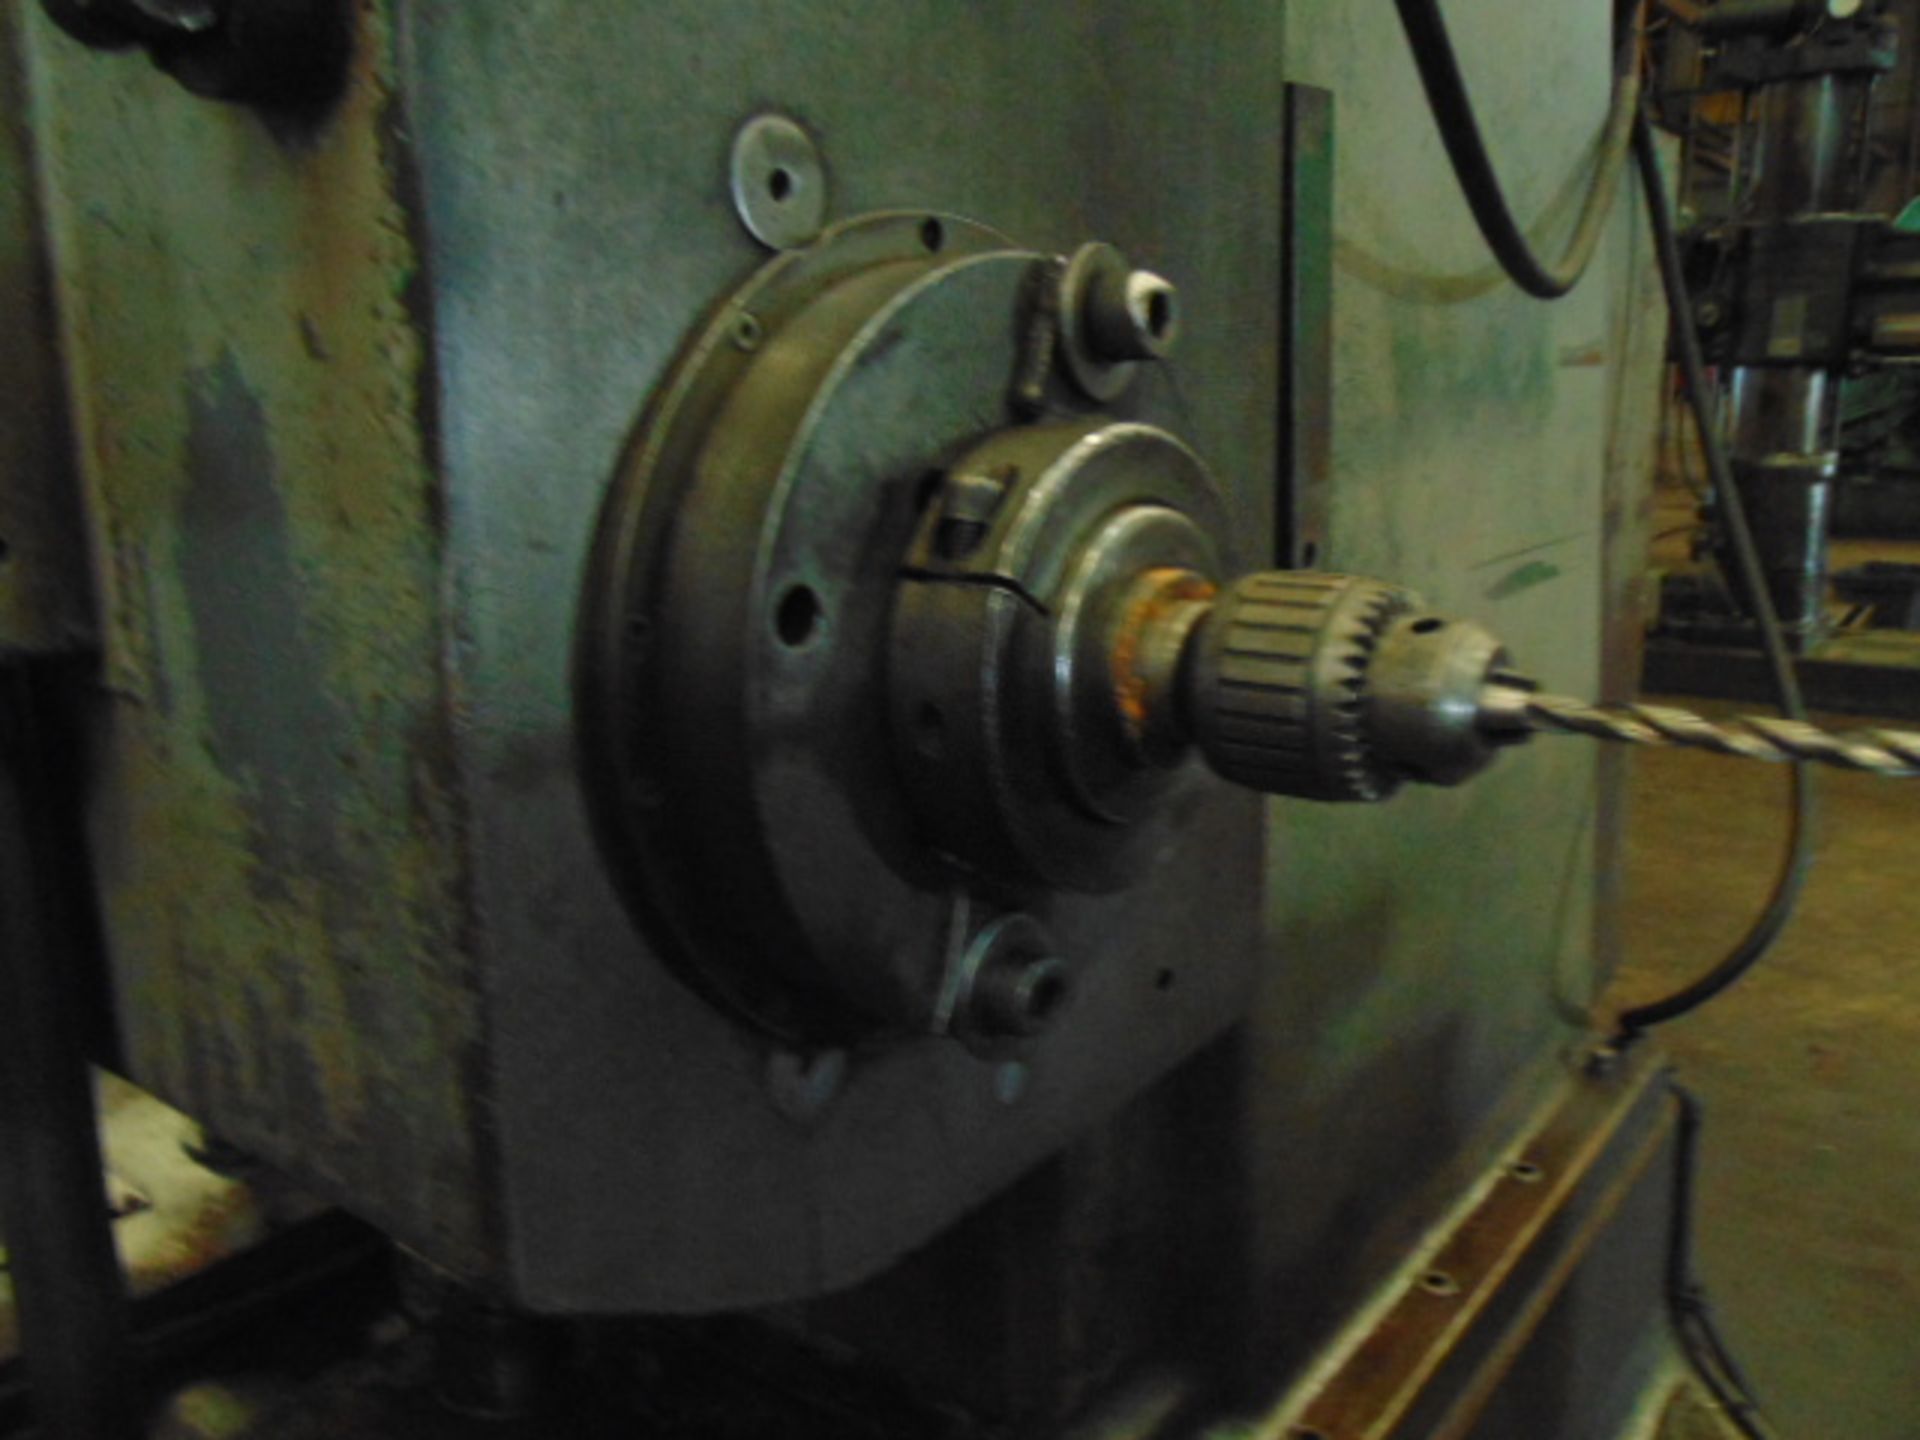 TABLE TYPE HORIZONTAL BORING MILL, LUCAS MDL. 428-60, 40" x 74" tbl., 60" cross travel, approx. - Image 3 of 16